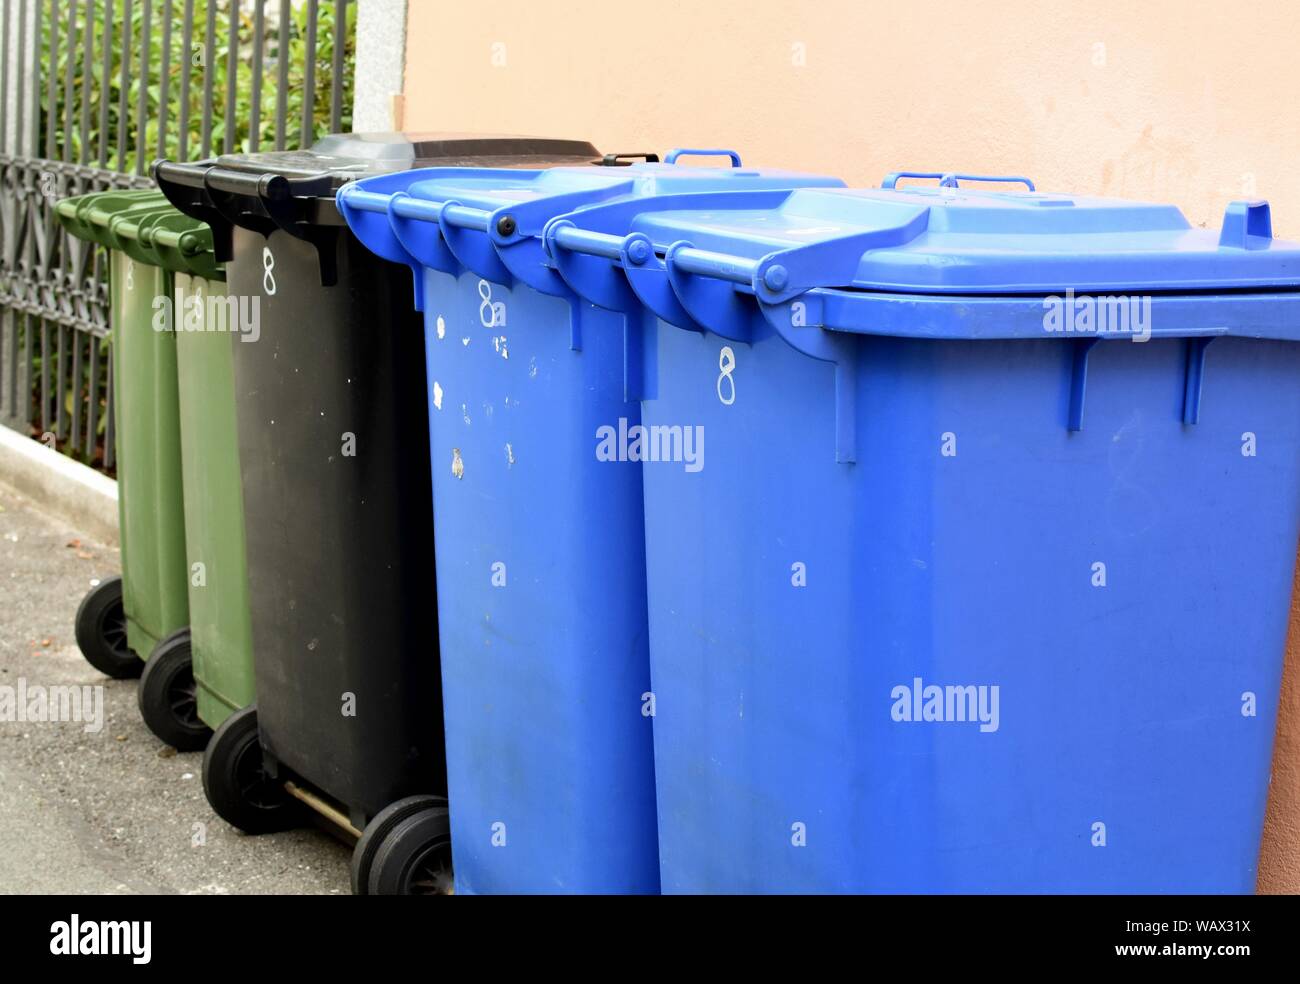 Plastic garbage containers along the wall on the street. Stock Photo